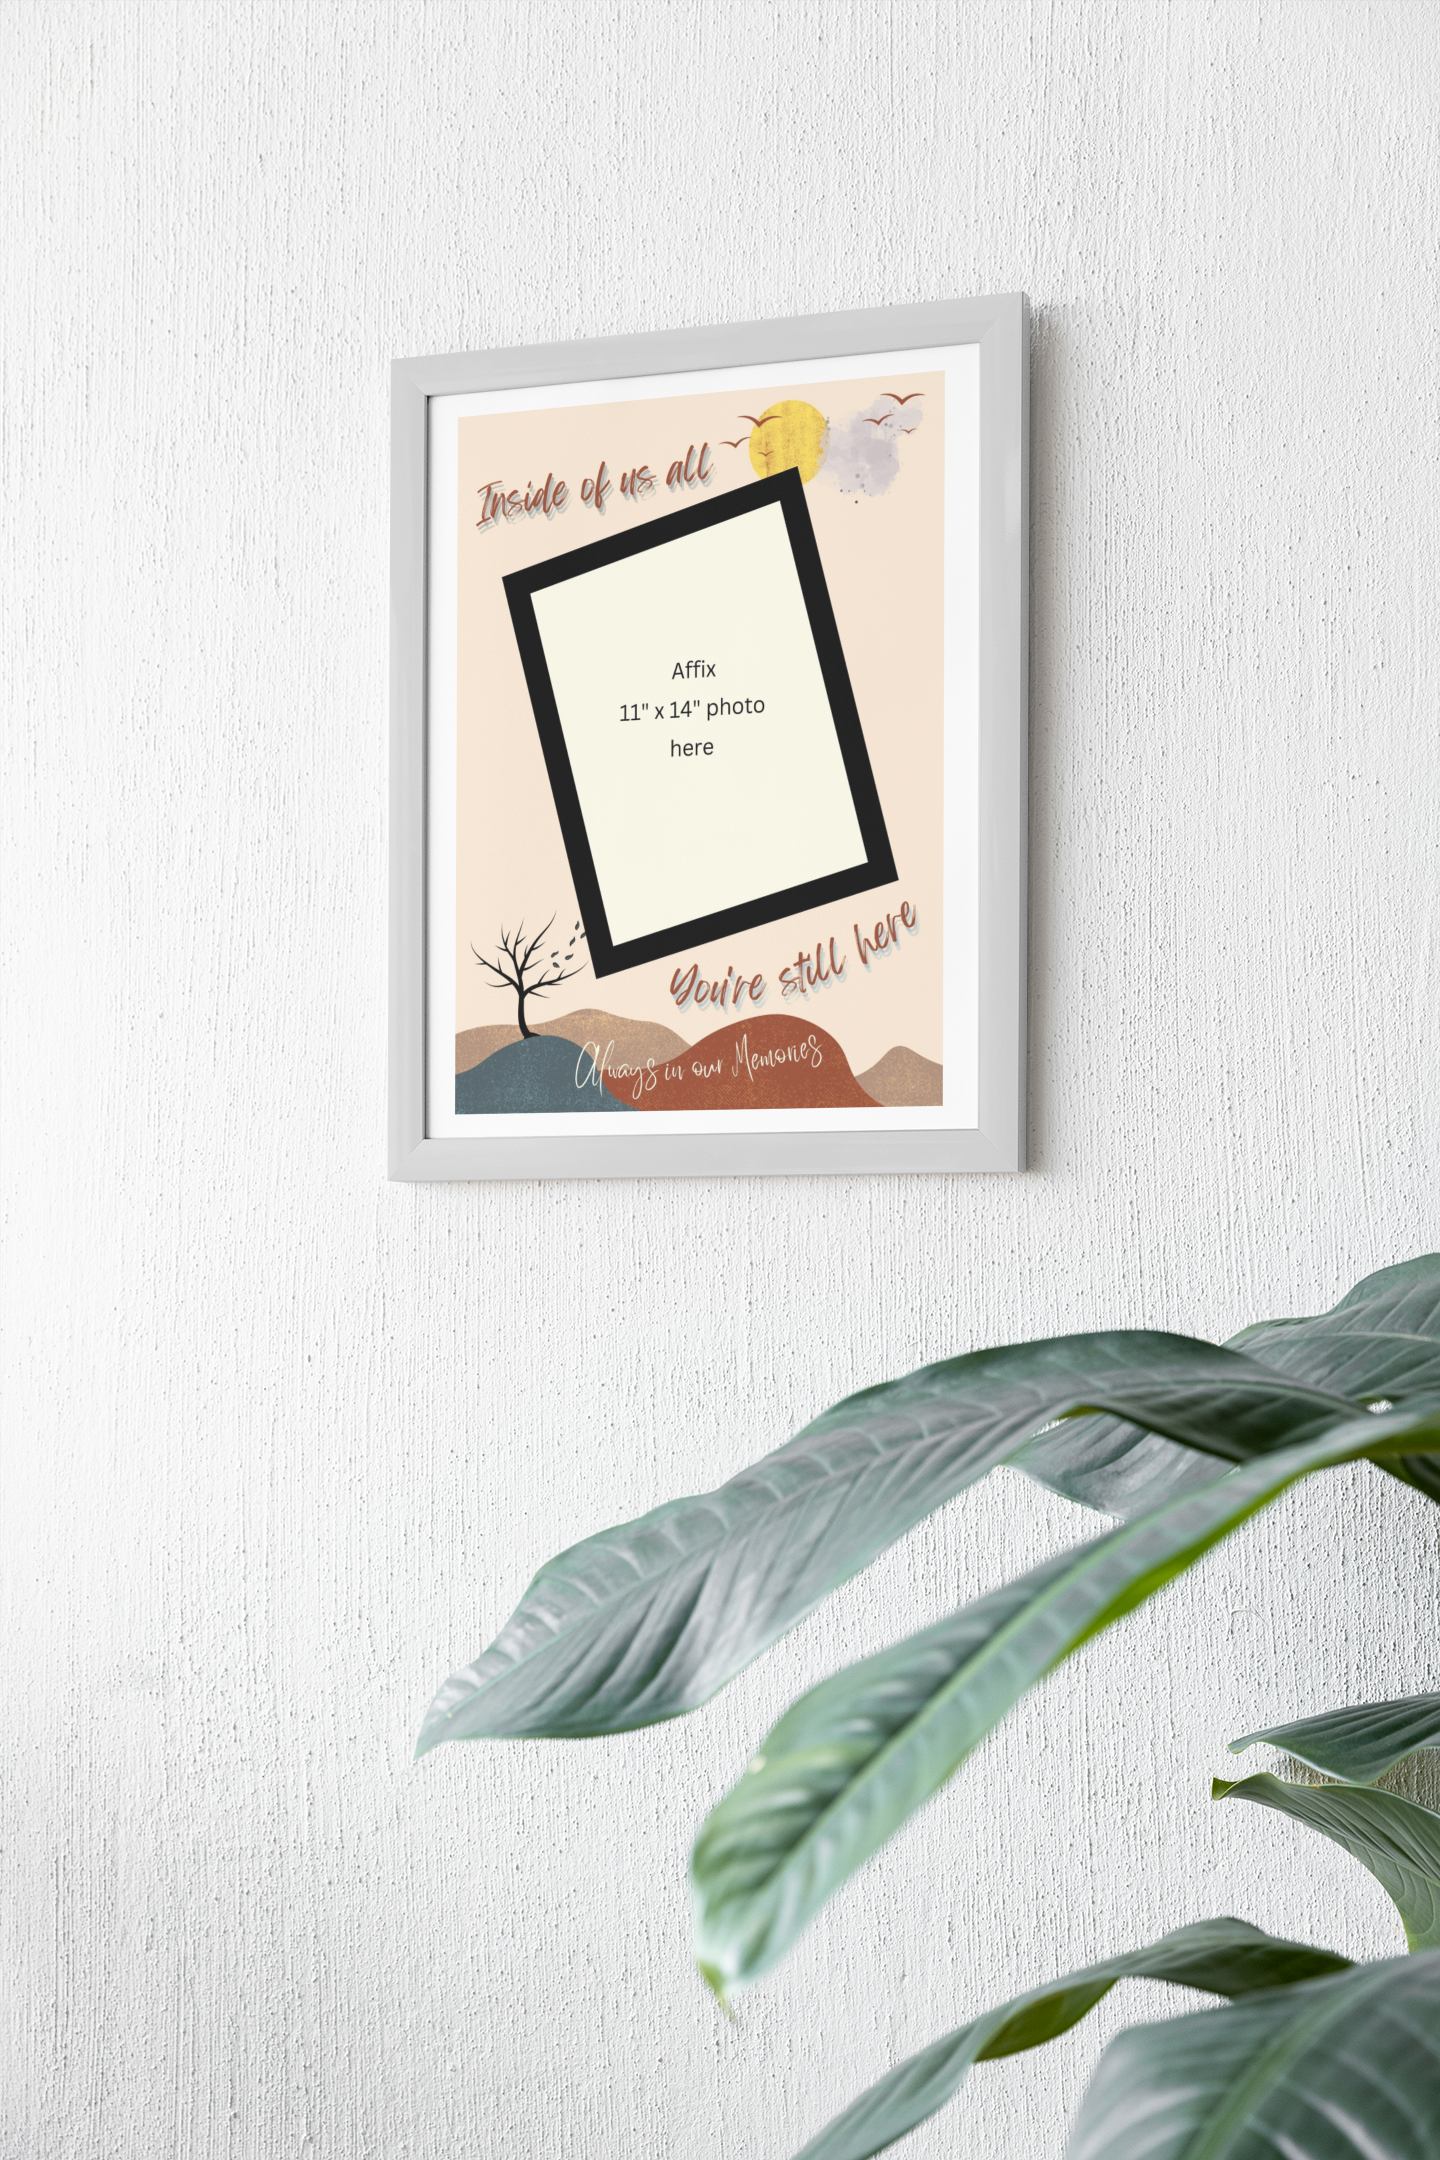 MEMORY of a LOVED ONE - QUIRKY UNIQUE WALL ART with a NATURE theme, featuring heartfelt words of love to remember them always.